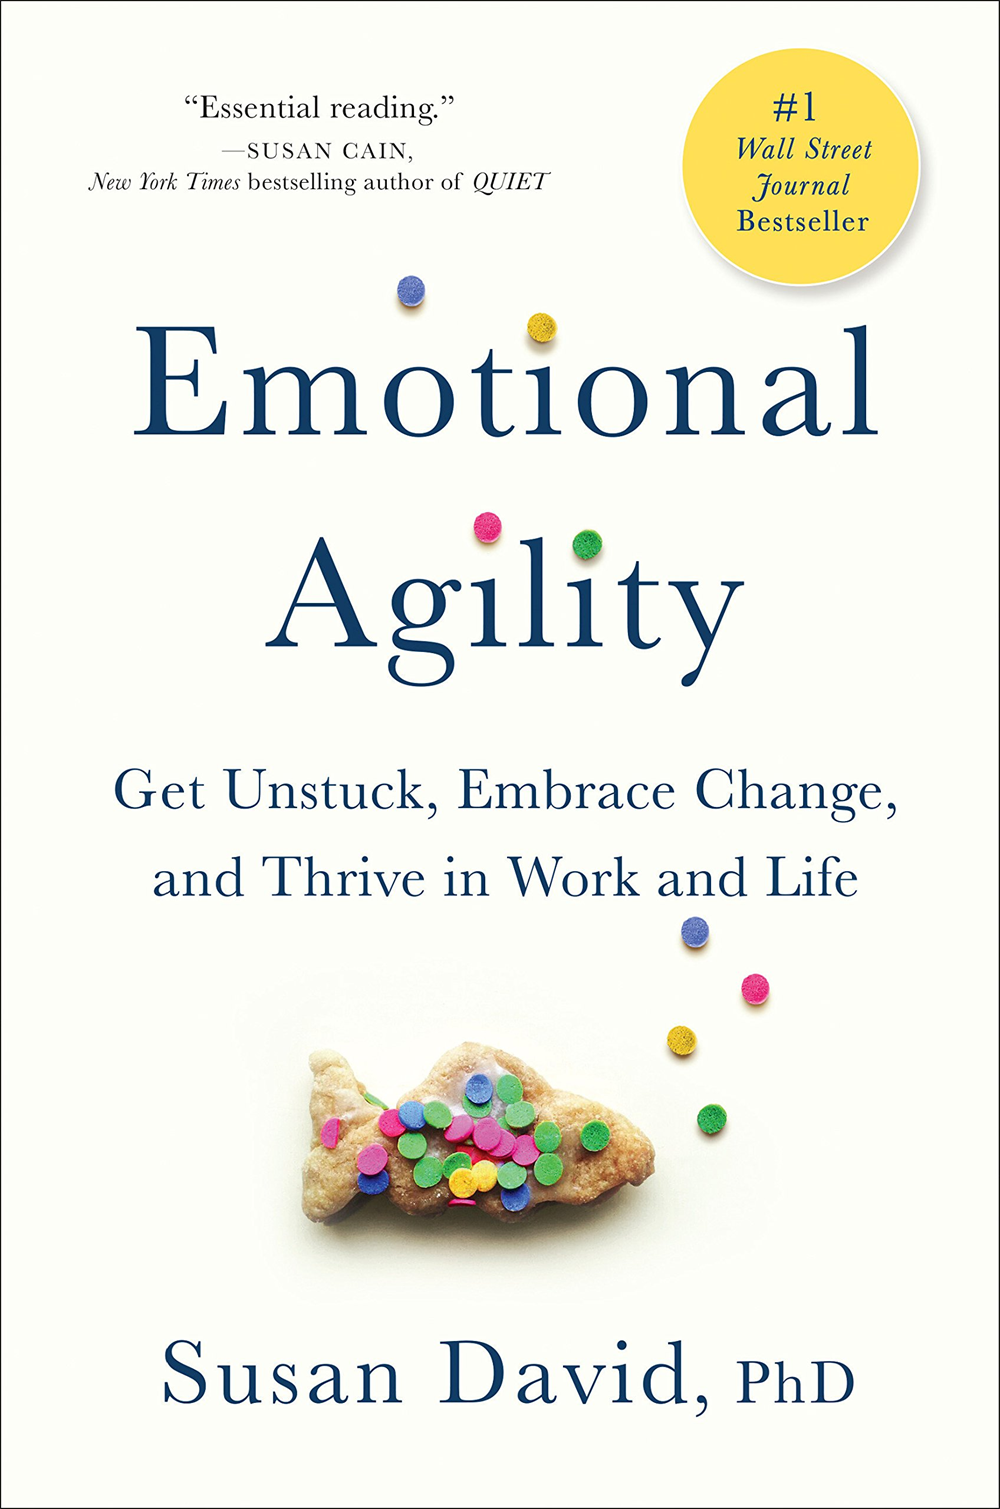 Emotional Agility Get Unstuck, Embrace Change, and Thrive in Work and Life